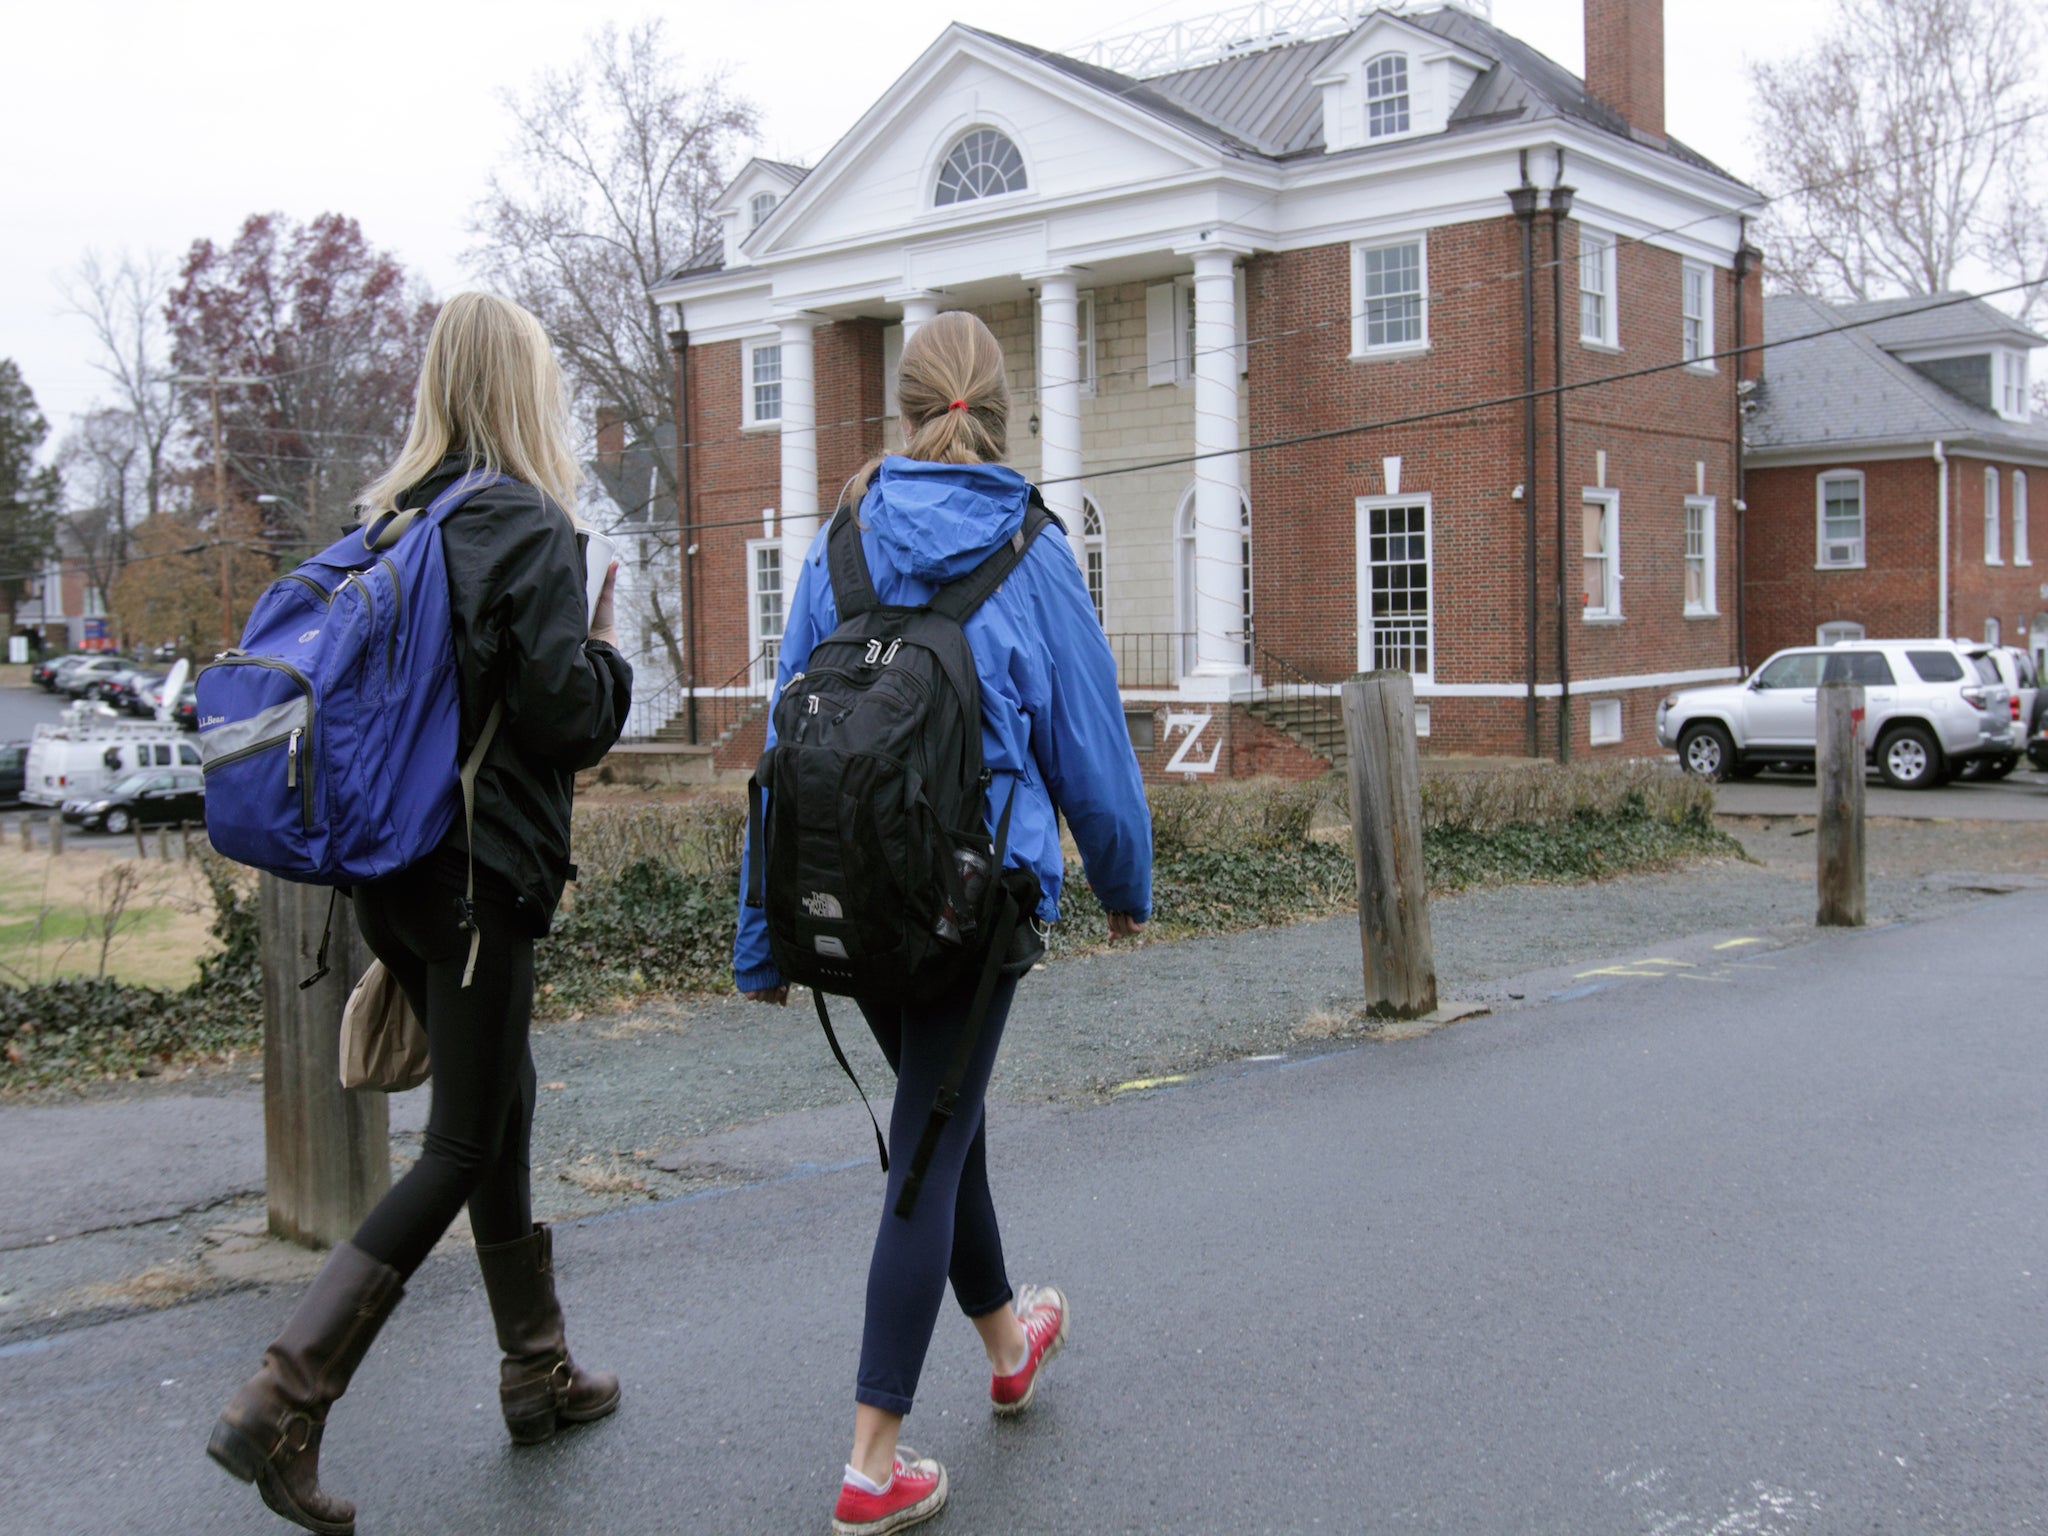 The allegations sparked outcry on the University of Virginia and beyond